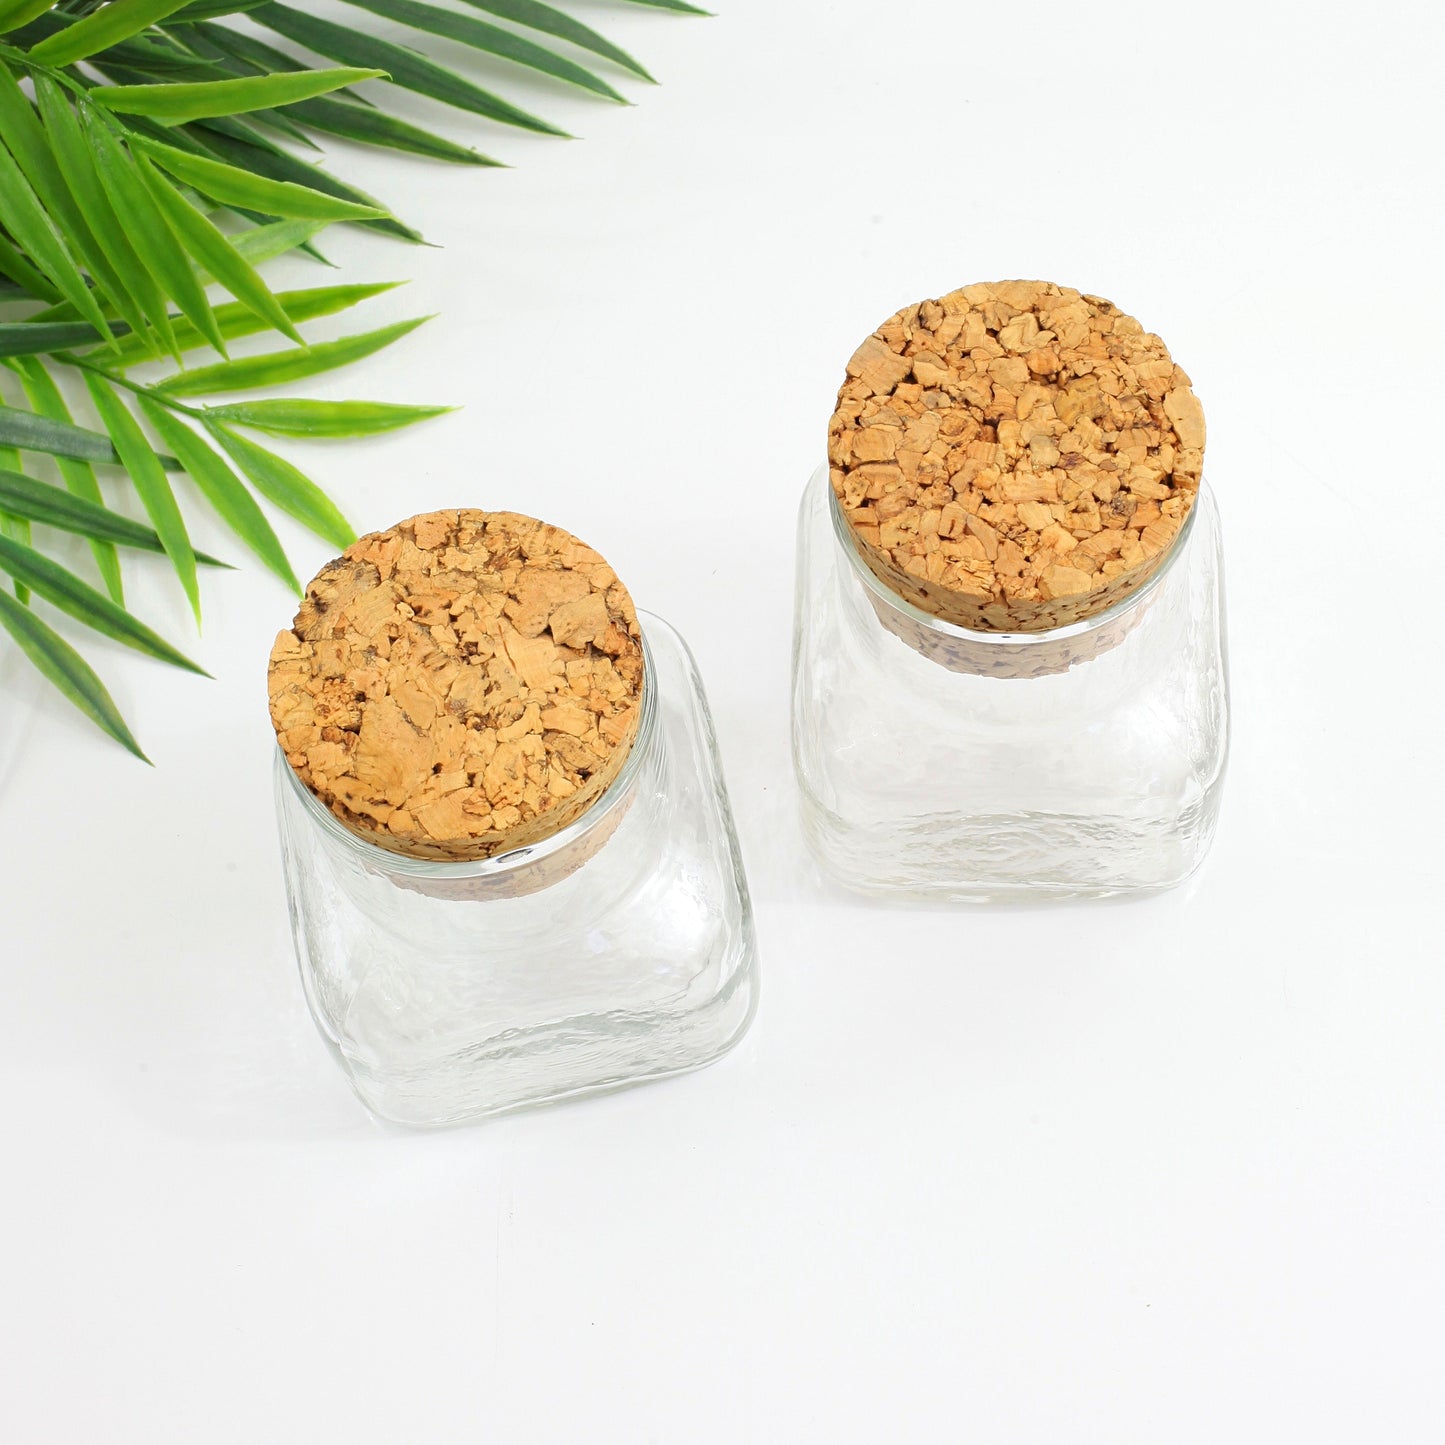 SOLD - Vintage Square Glass Apothecary Jars with Cork Lids